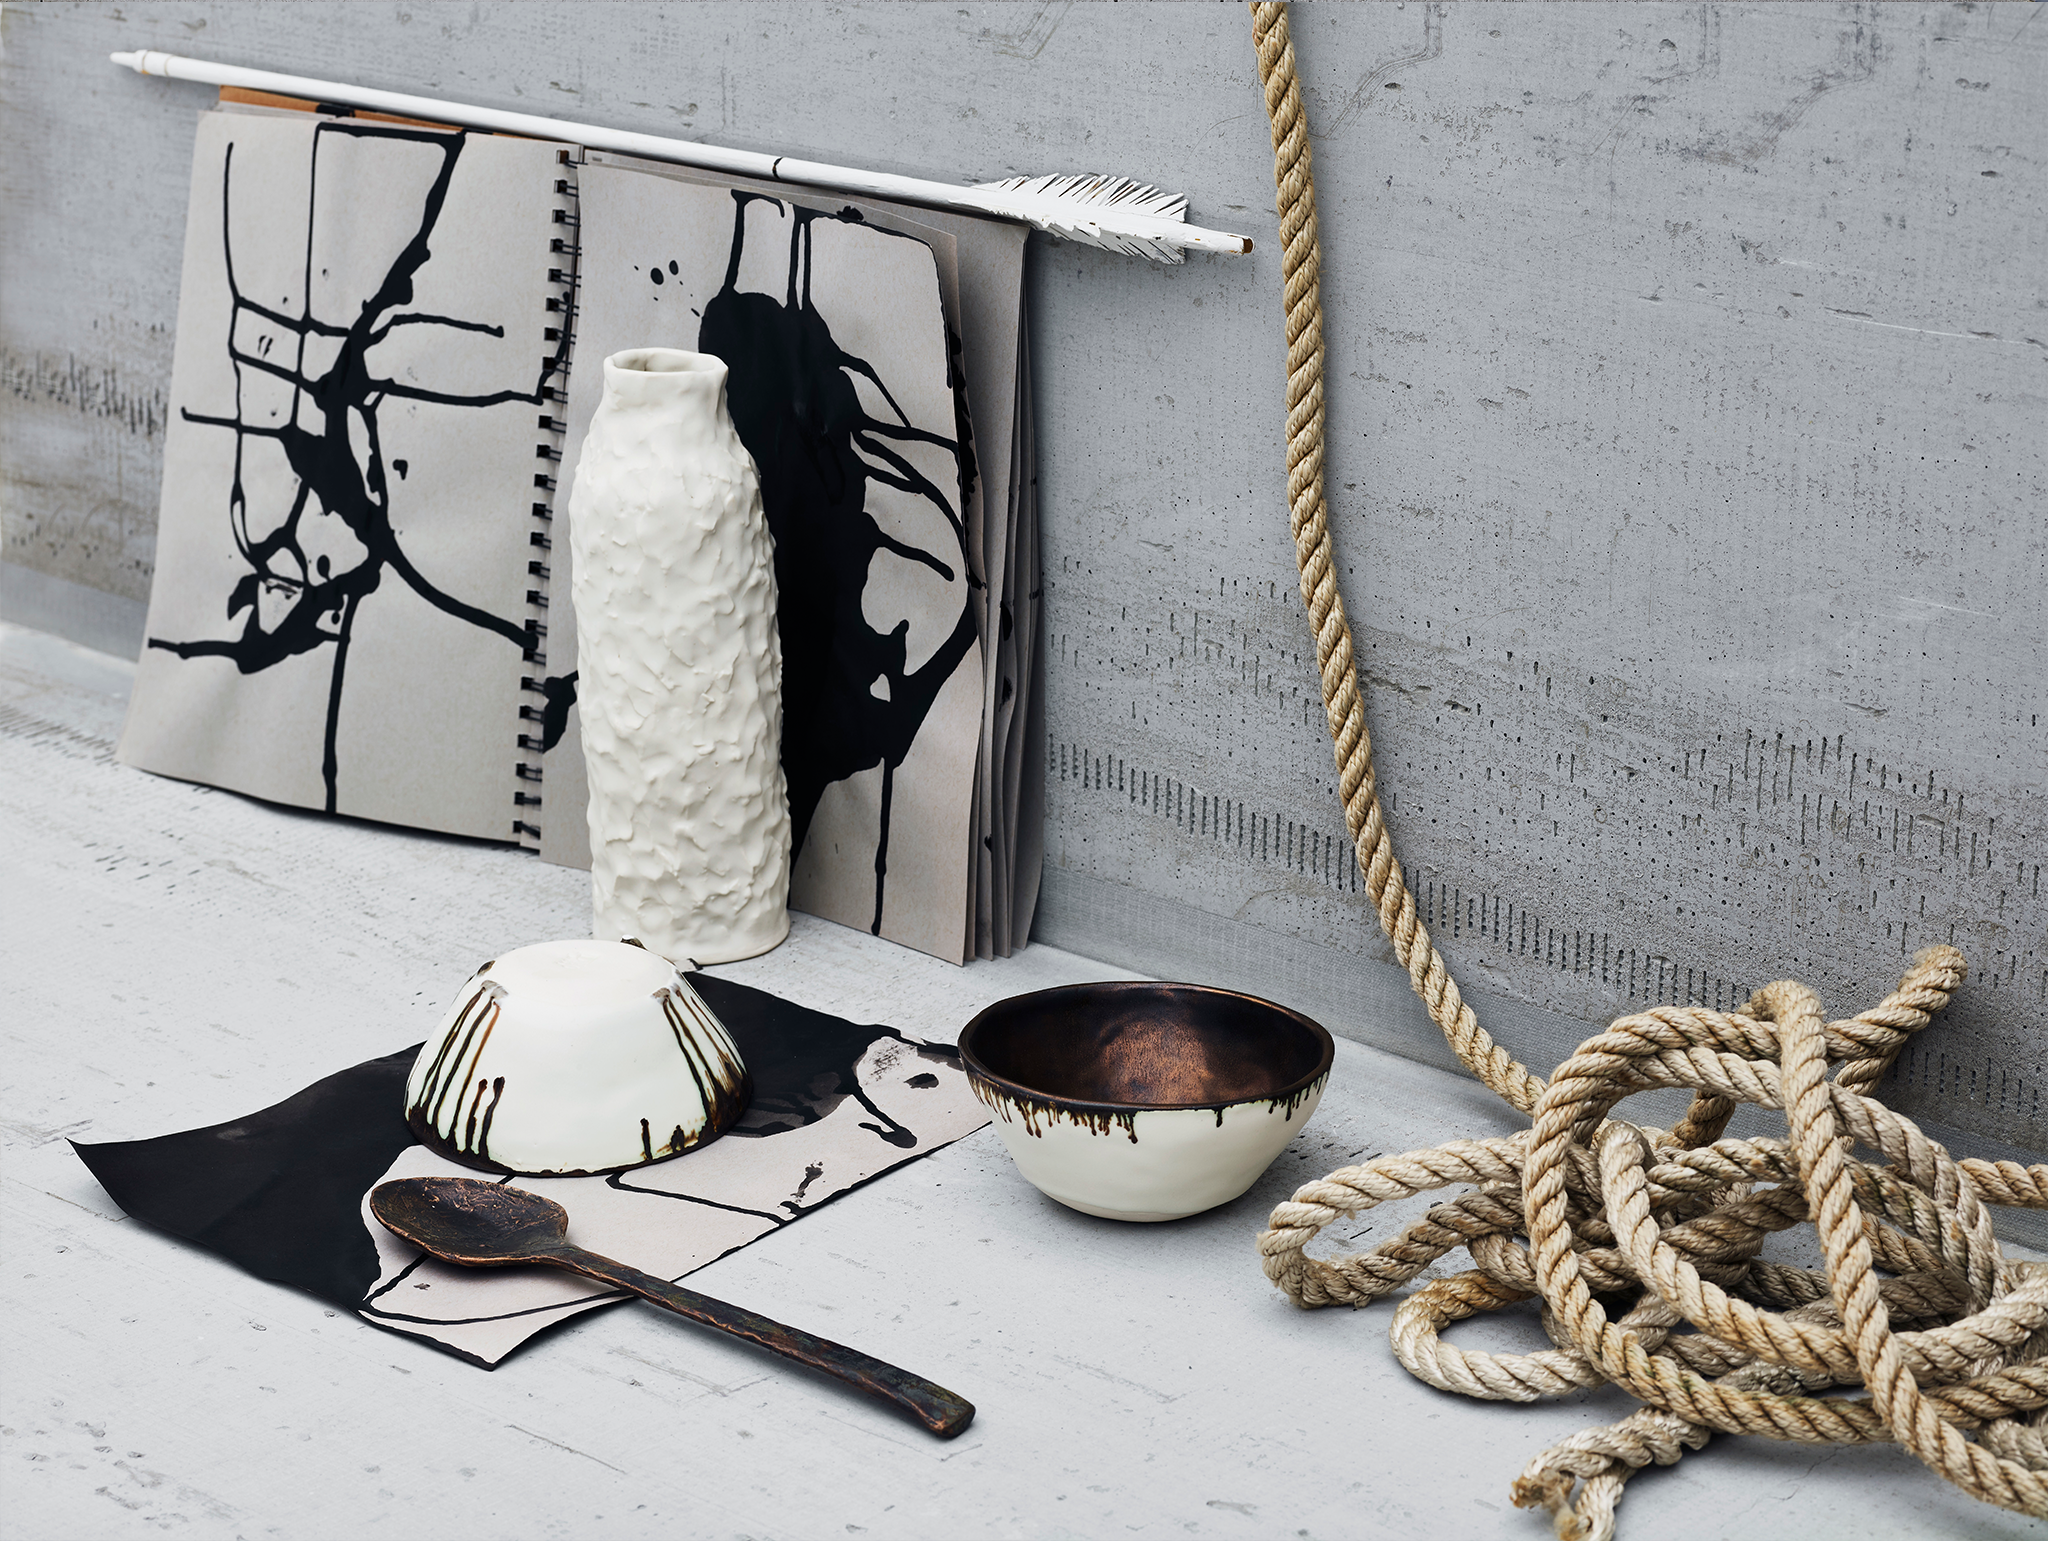 Textured white ceramic vase and bowls with bronze details on concrete background with rope, notebook, arrow and black ink